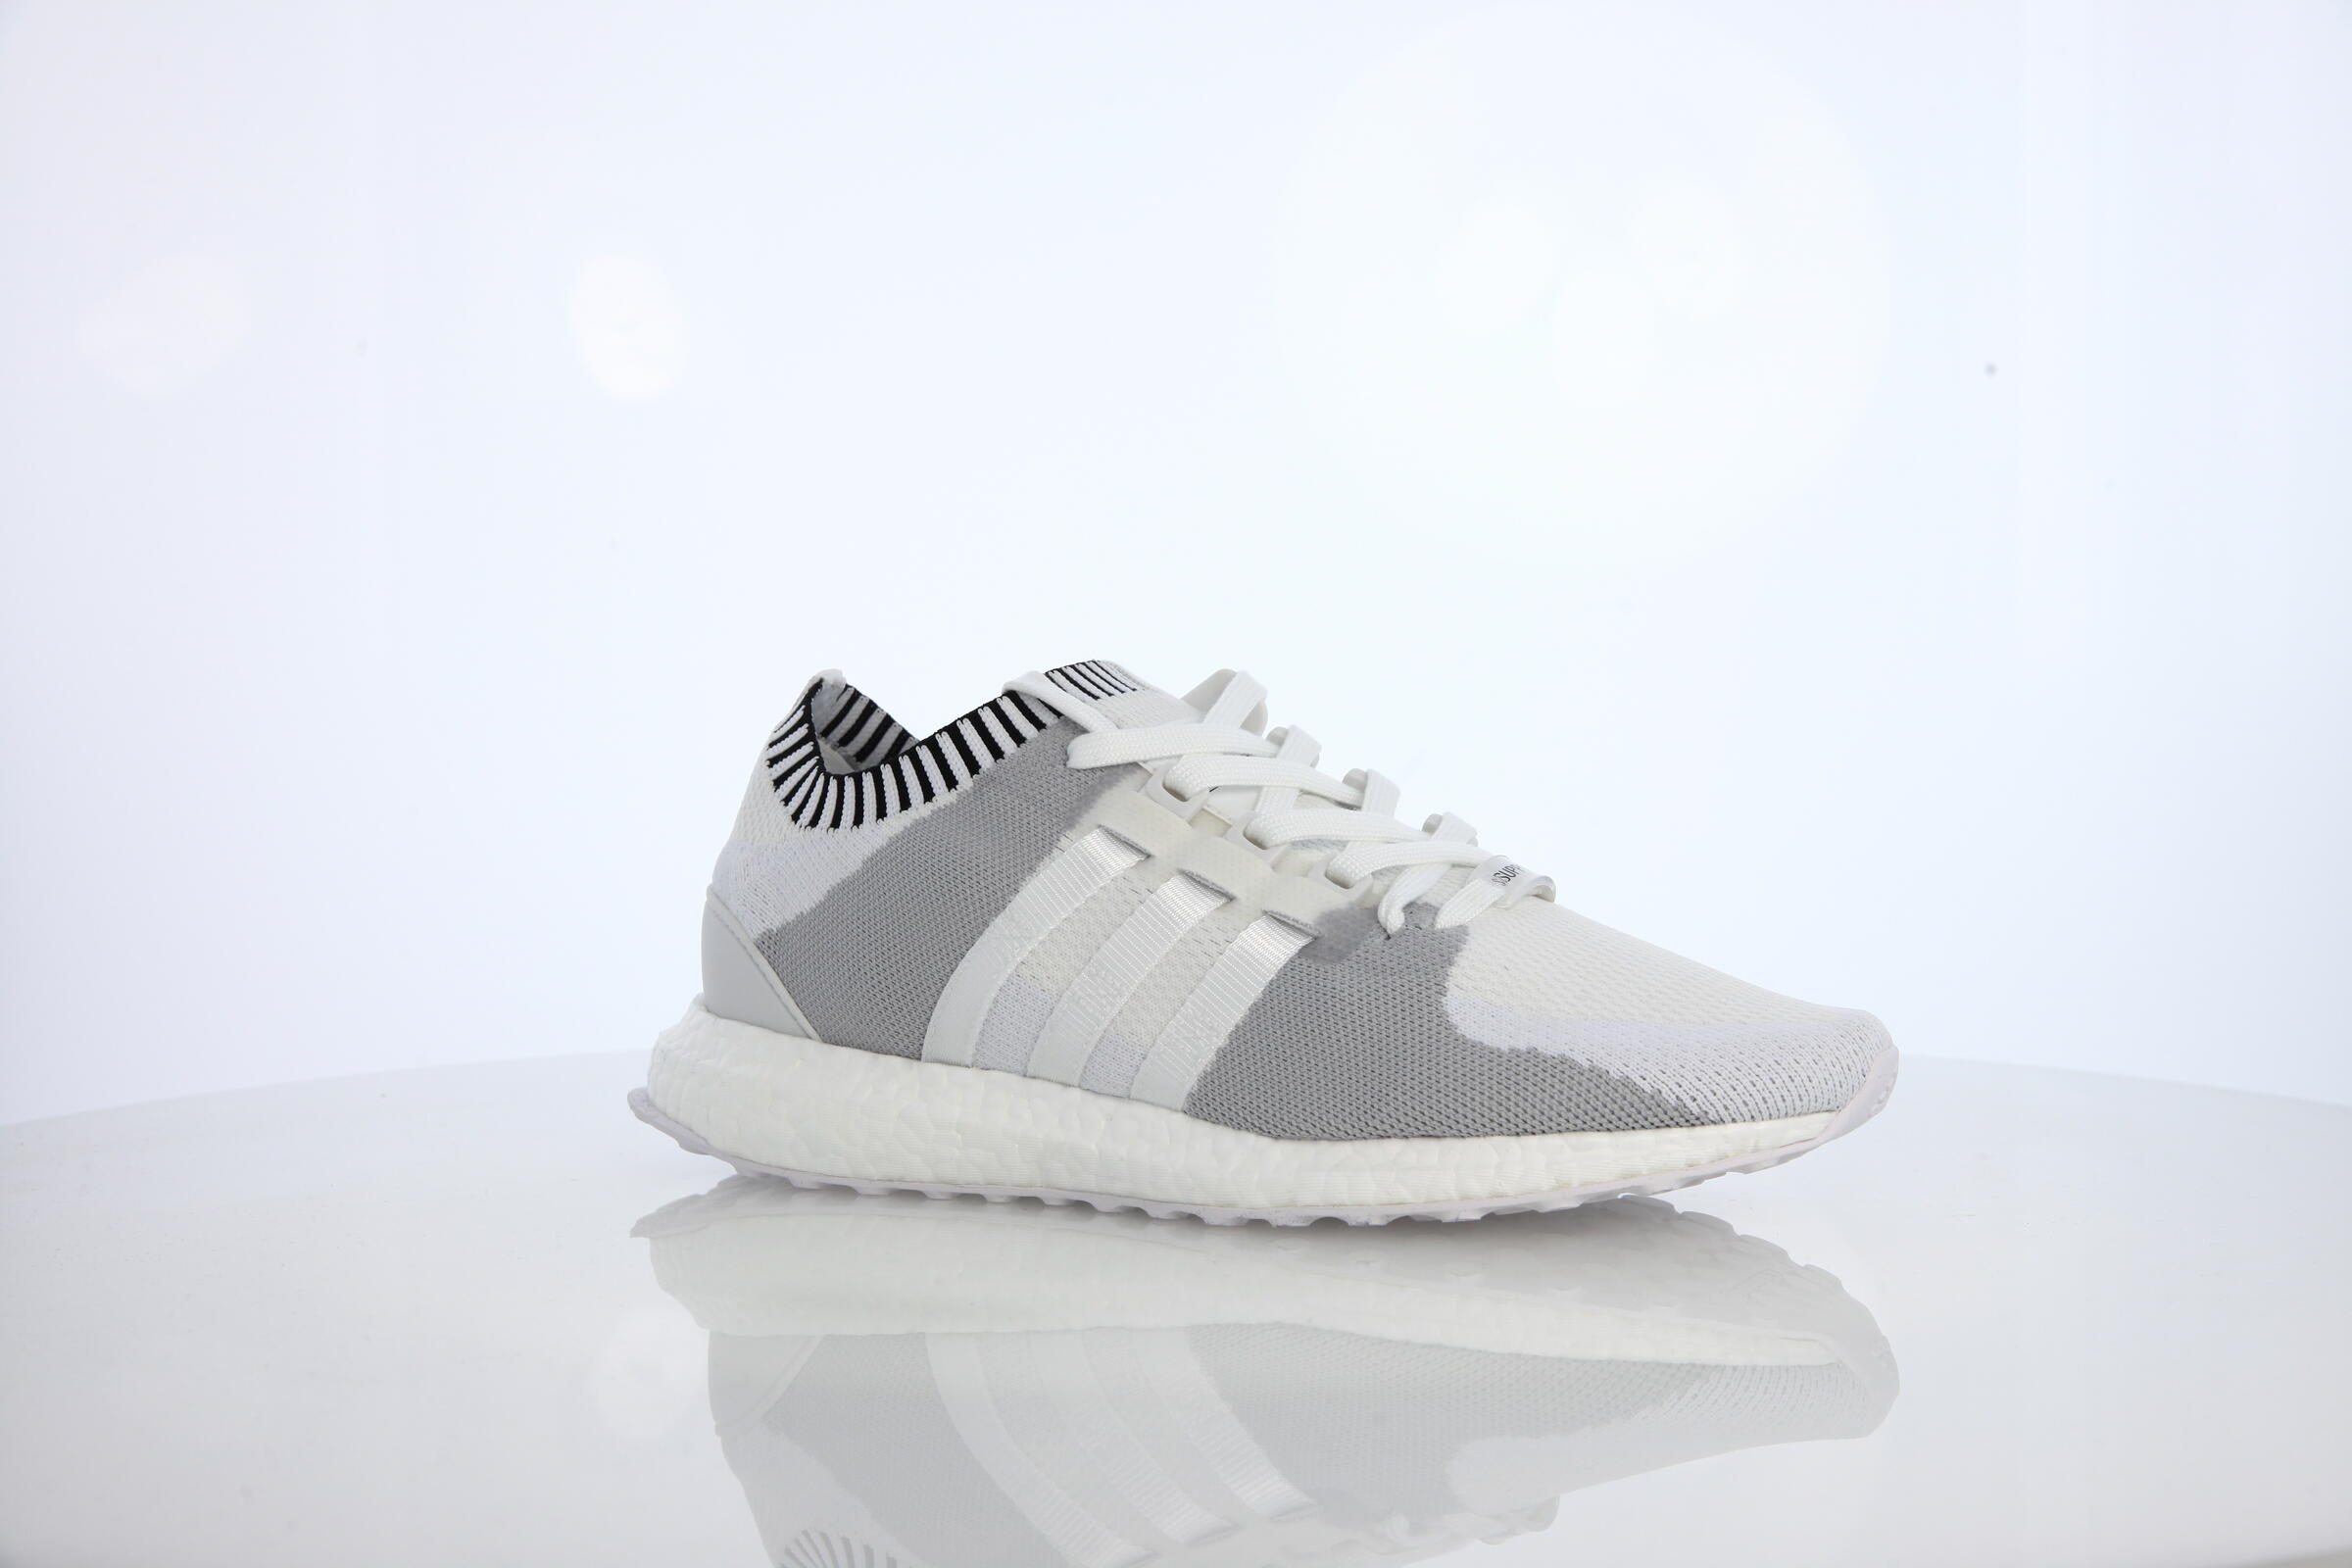 adidas Performance Equipment Support Ultra Prime "Vintage White"